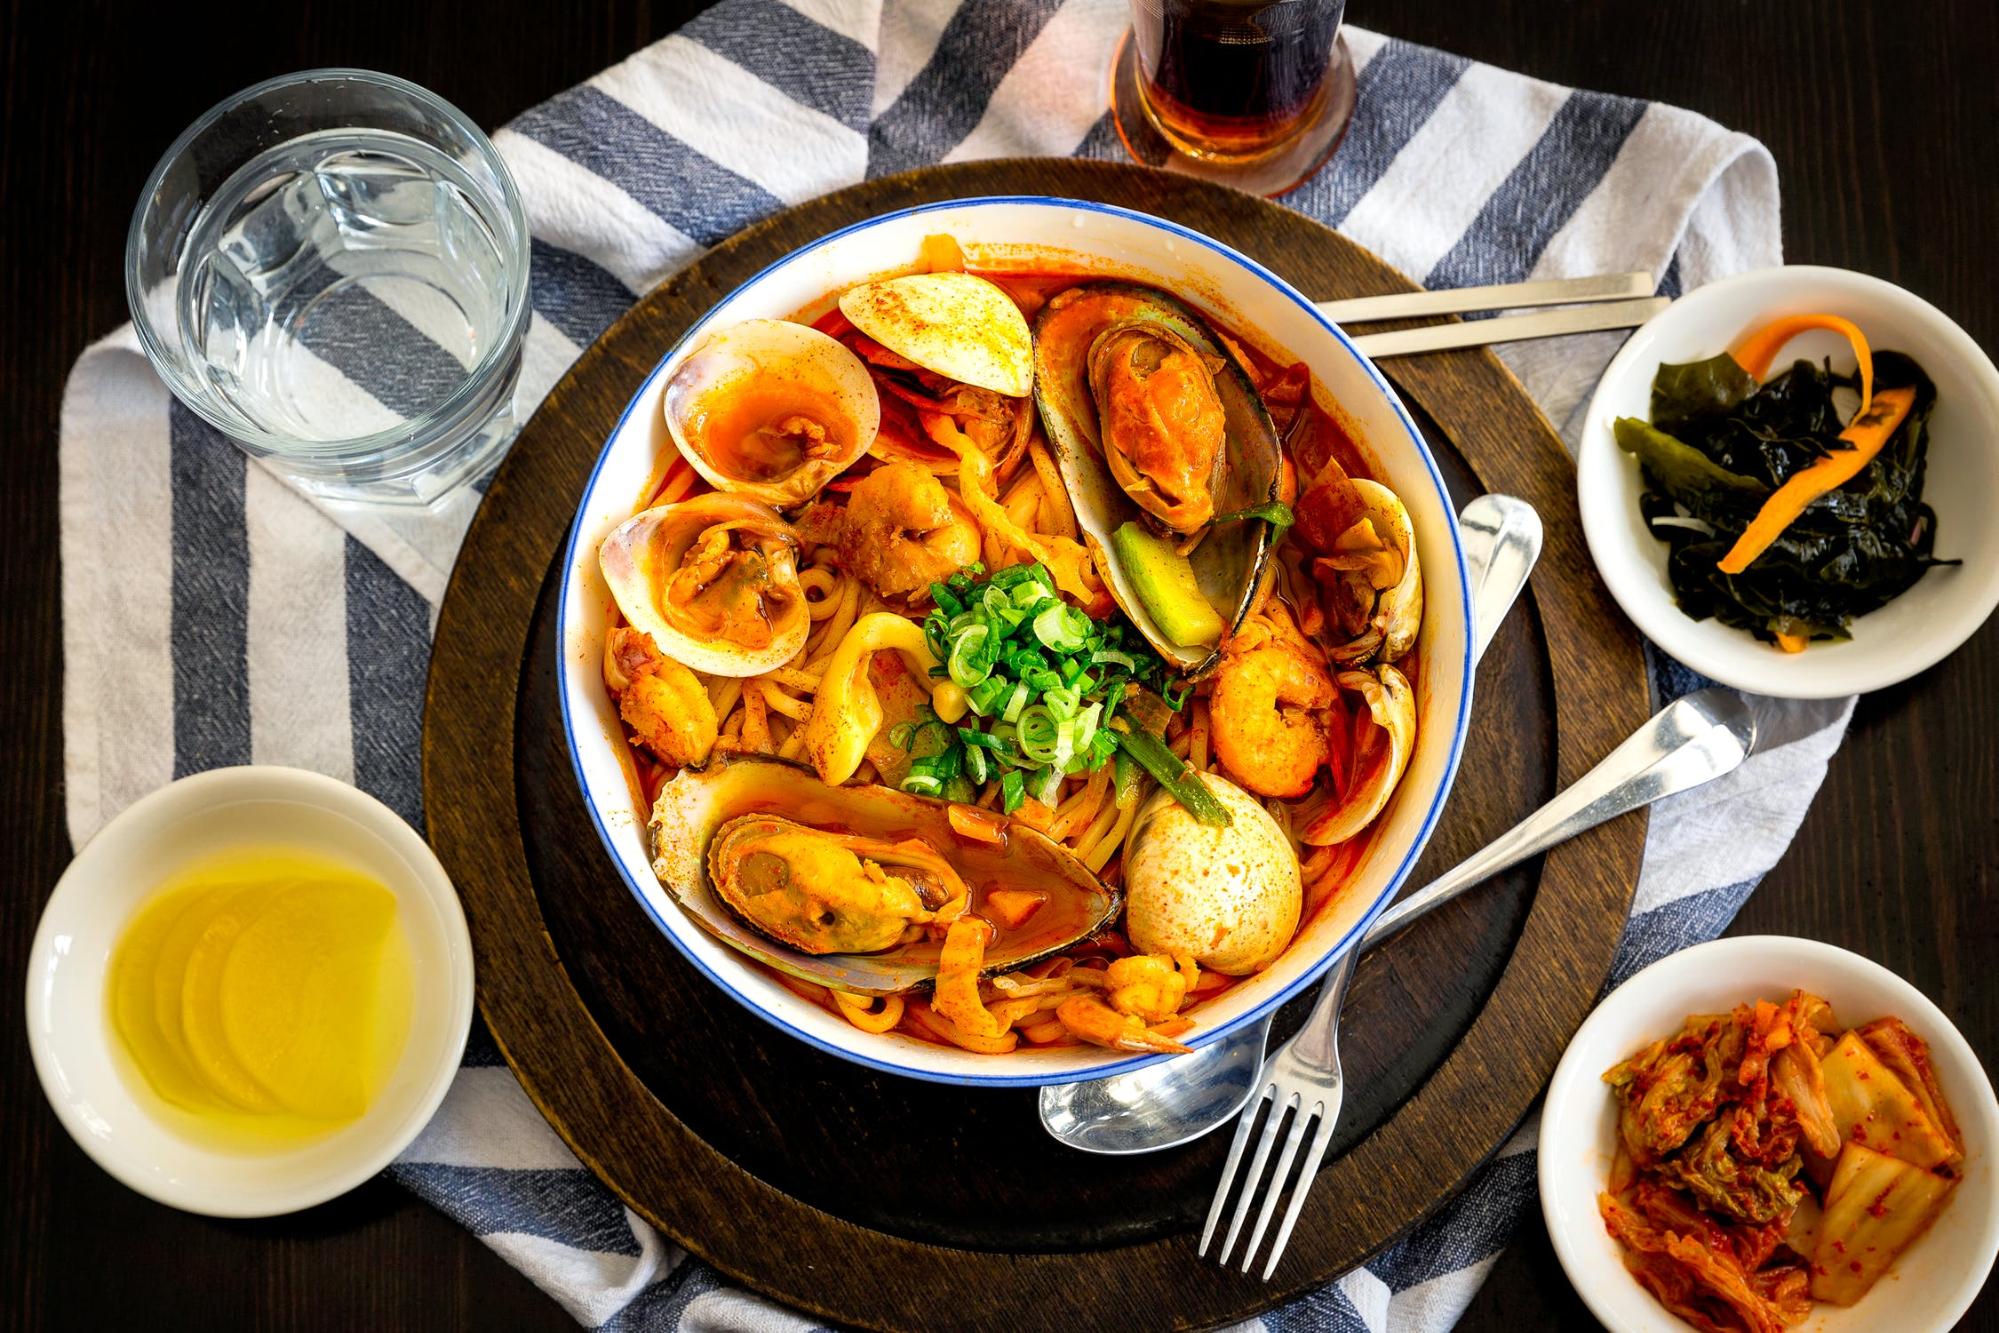 PASTA PLUS SEAFOOD: 5 Sumptuous Seafood Pasta Dishes to Try!